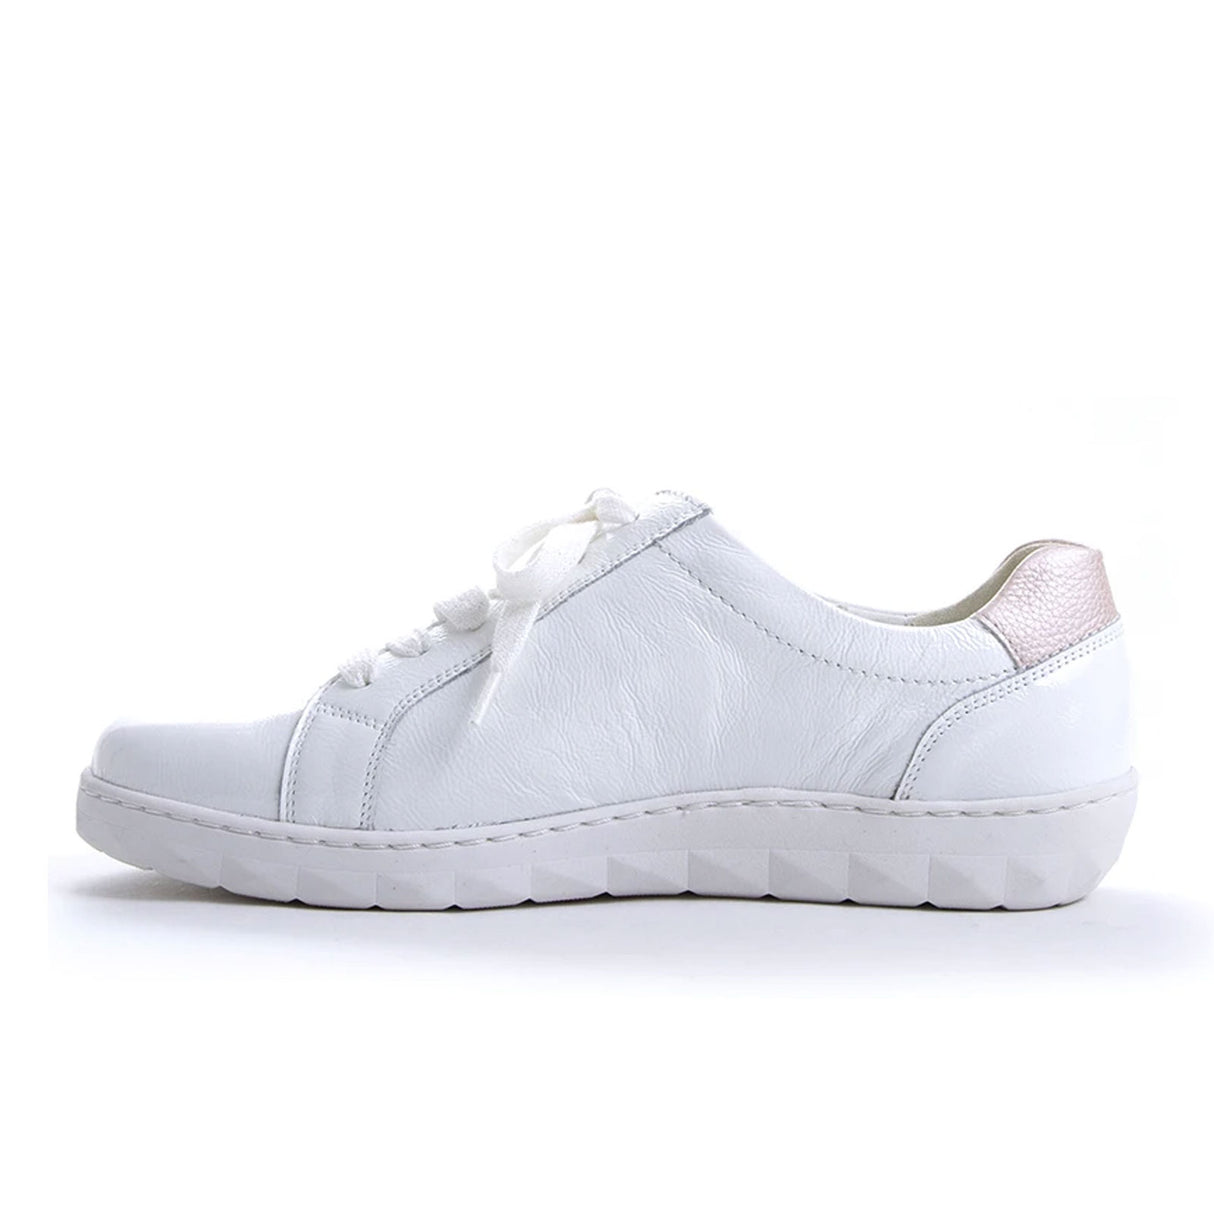 Waldlaufer Maria 921002 Sneaker (Women) - Patent White/Rose Athletic - Athleisure - The Heel Shoe Fitters